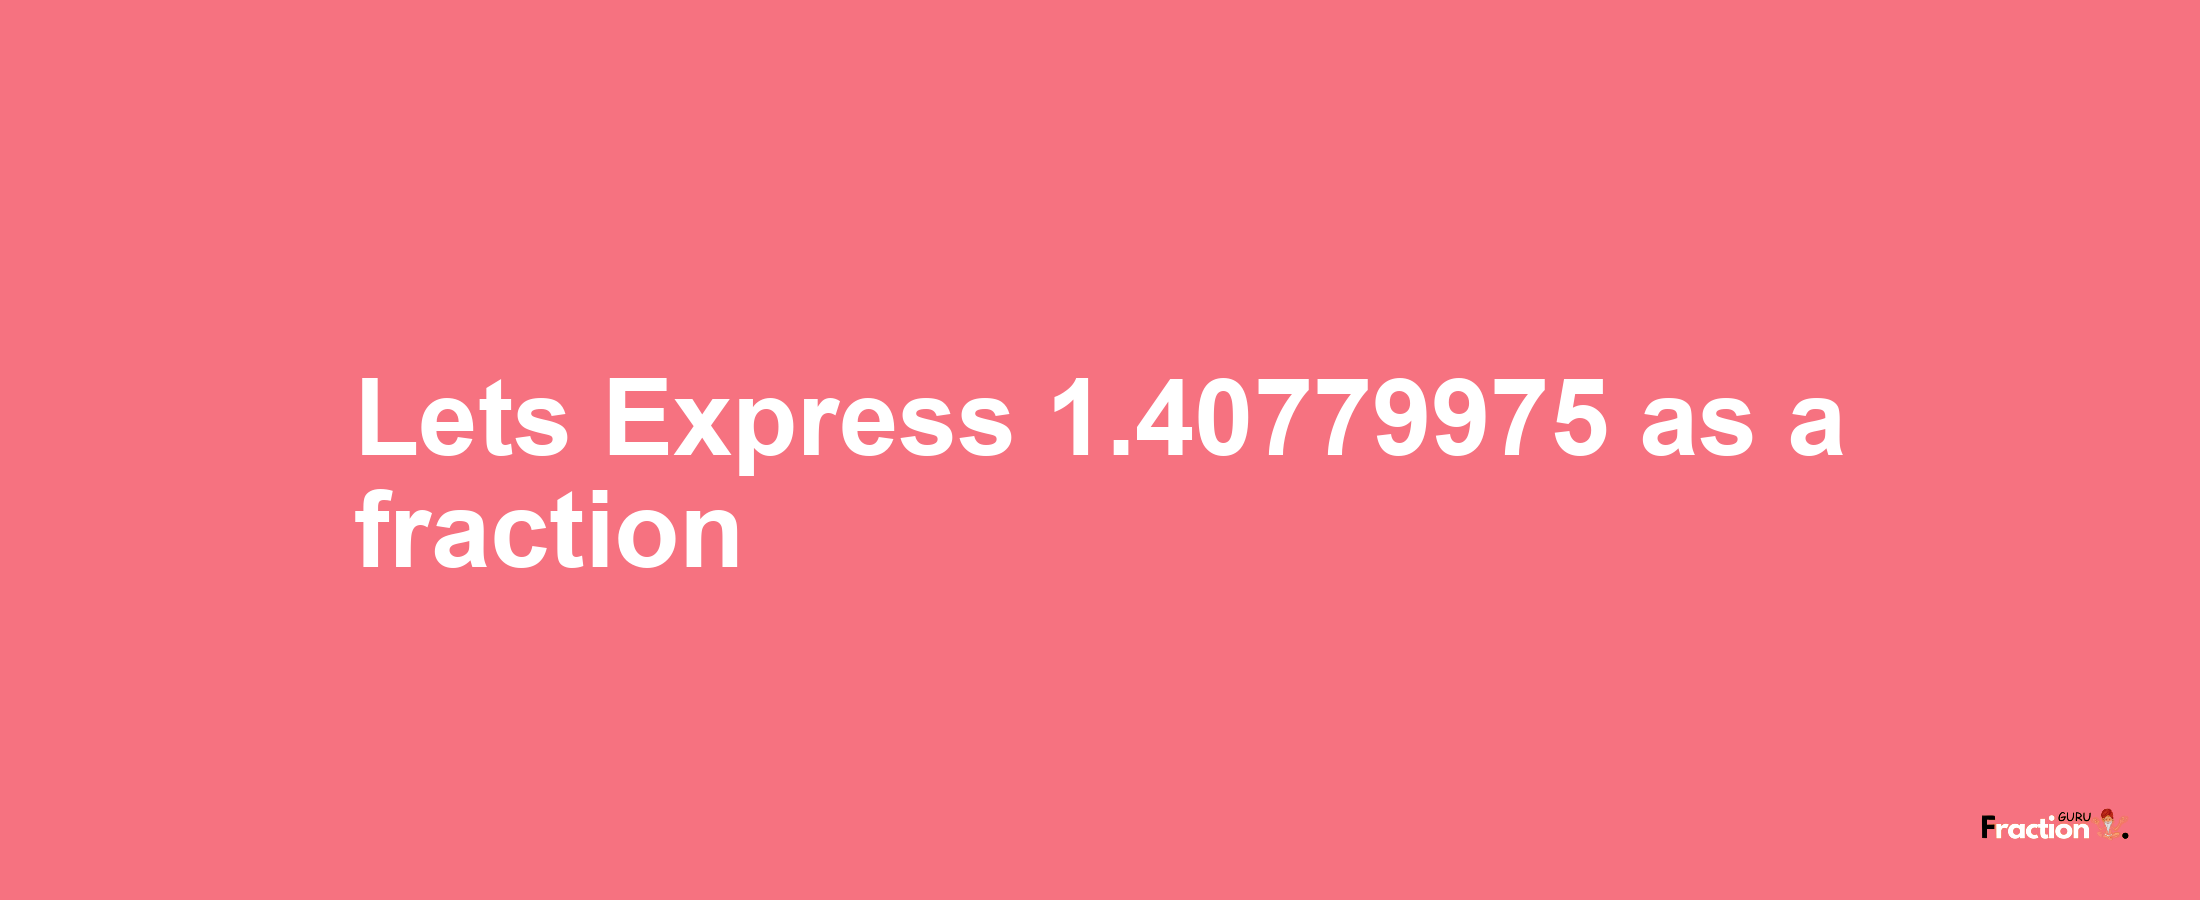 Lets Express 1.40779975 as afraction